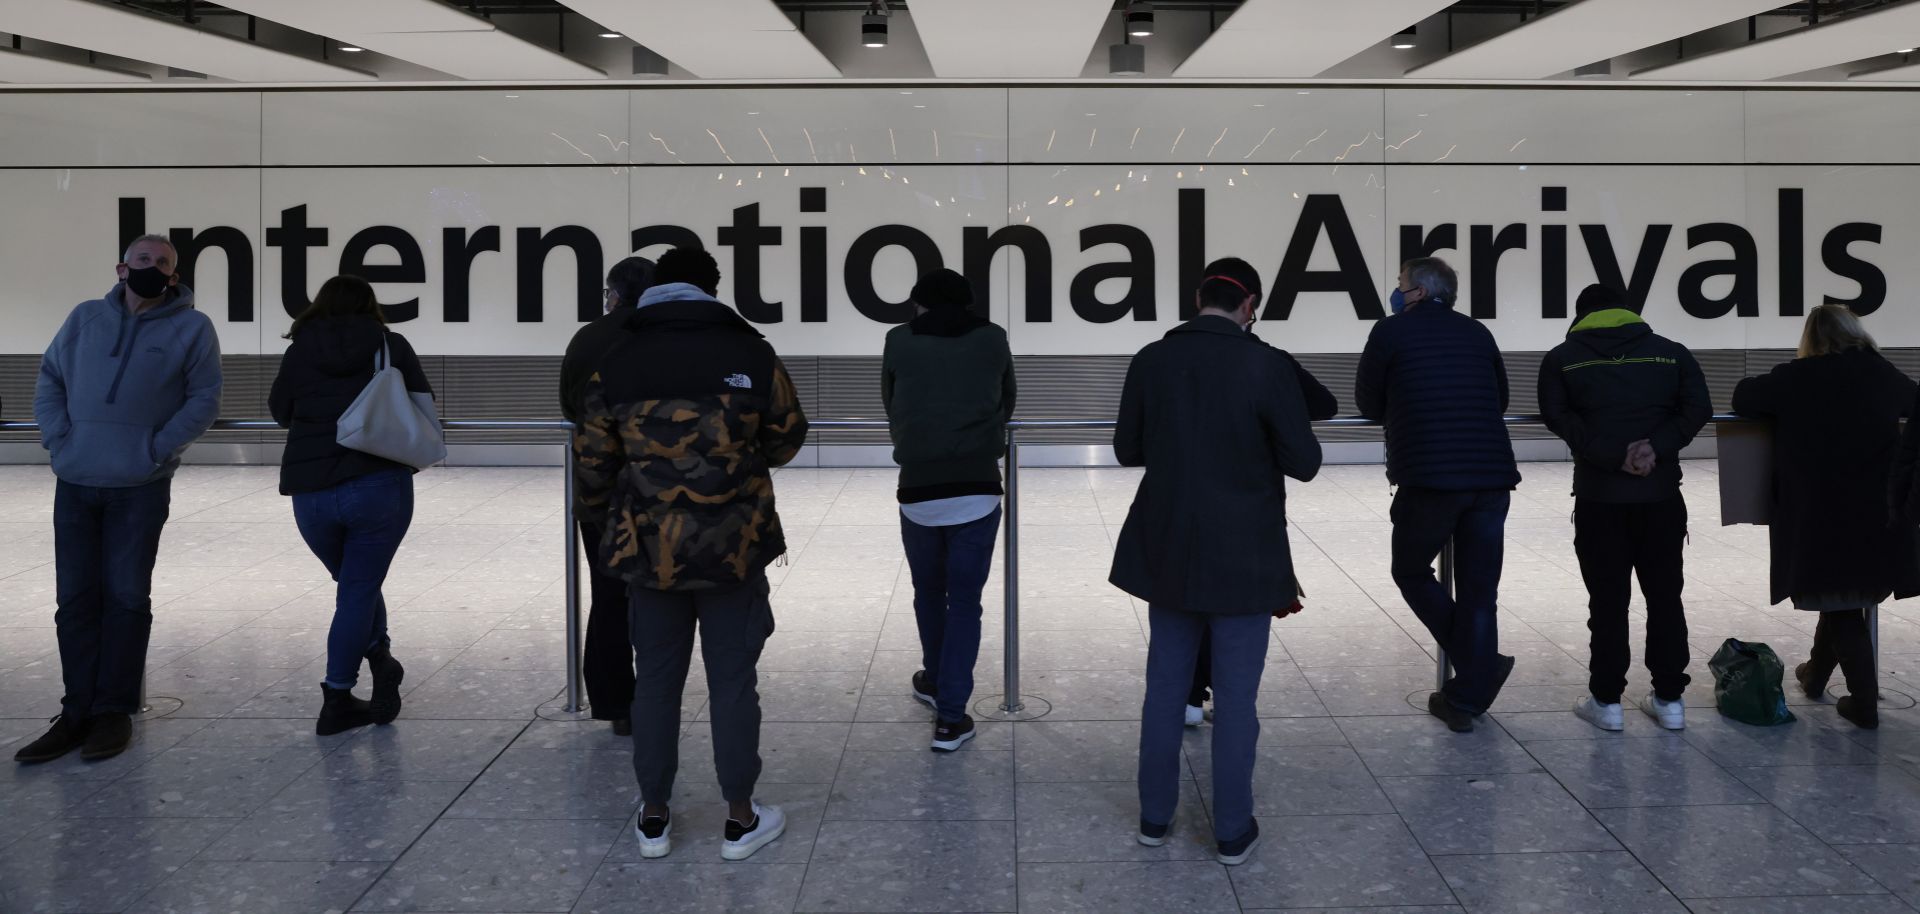 People wait at the international arrivals gate at London’s Heathrow Airport on Nov. 28, 2021. The United Kingdom recently imposed new travel restrictions following the discovery of the Omicron COVID-19 variant. 